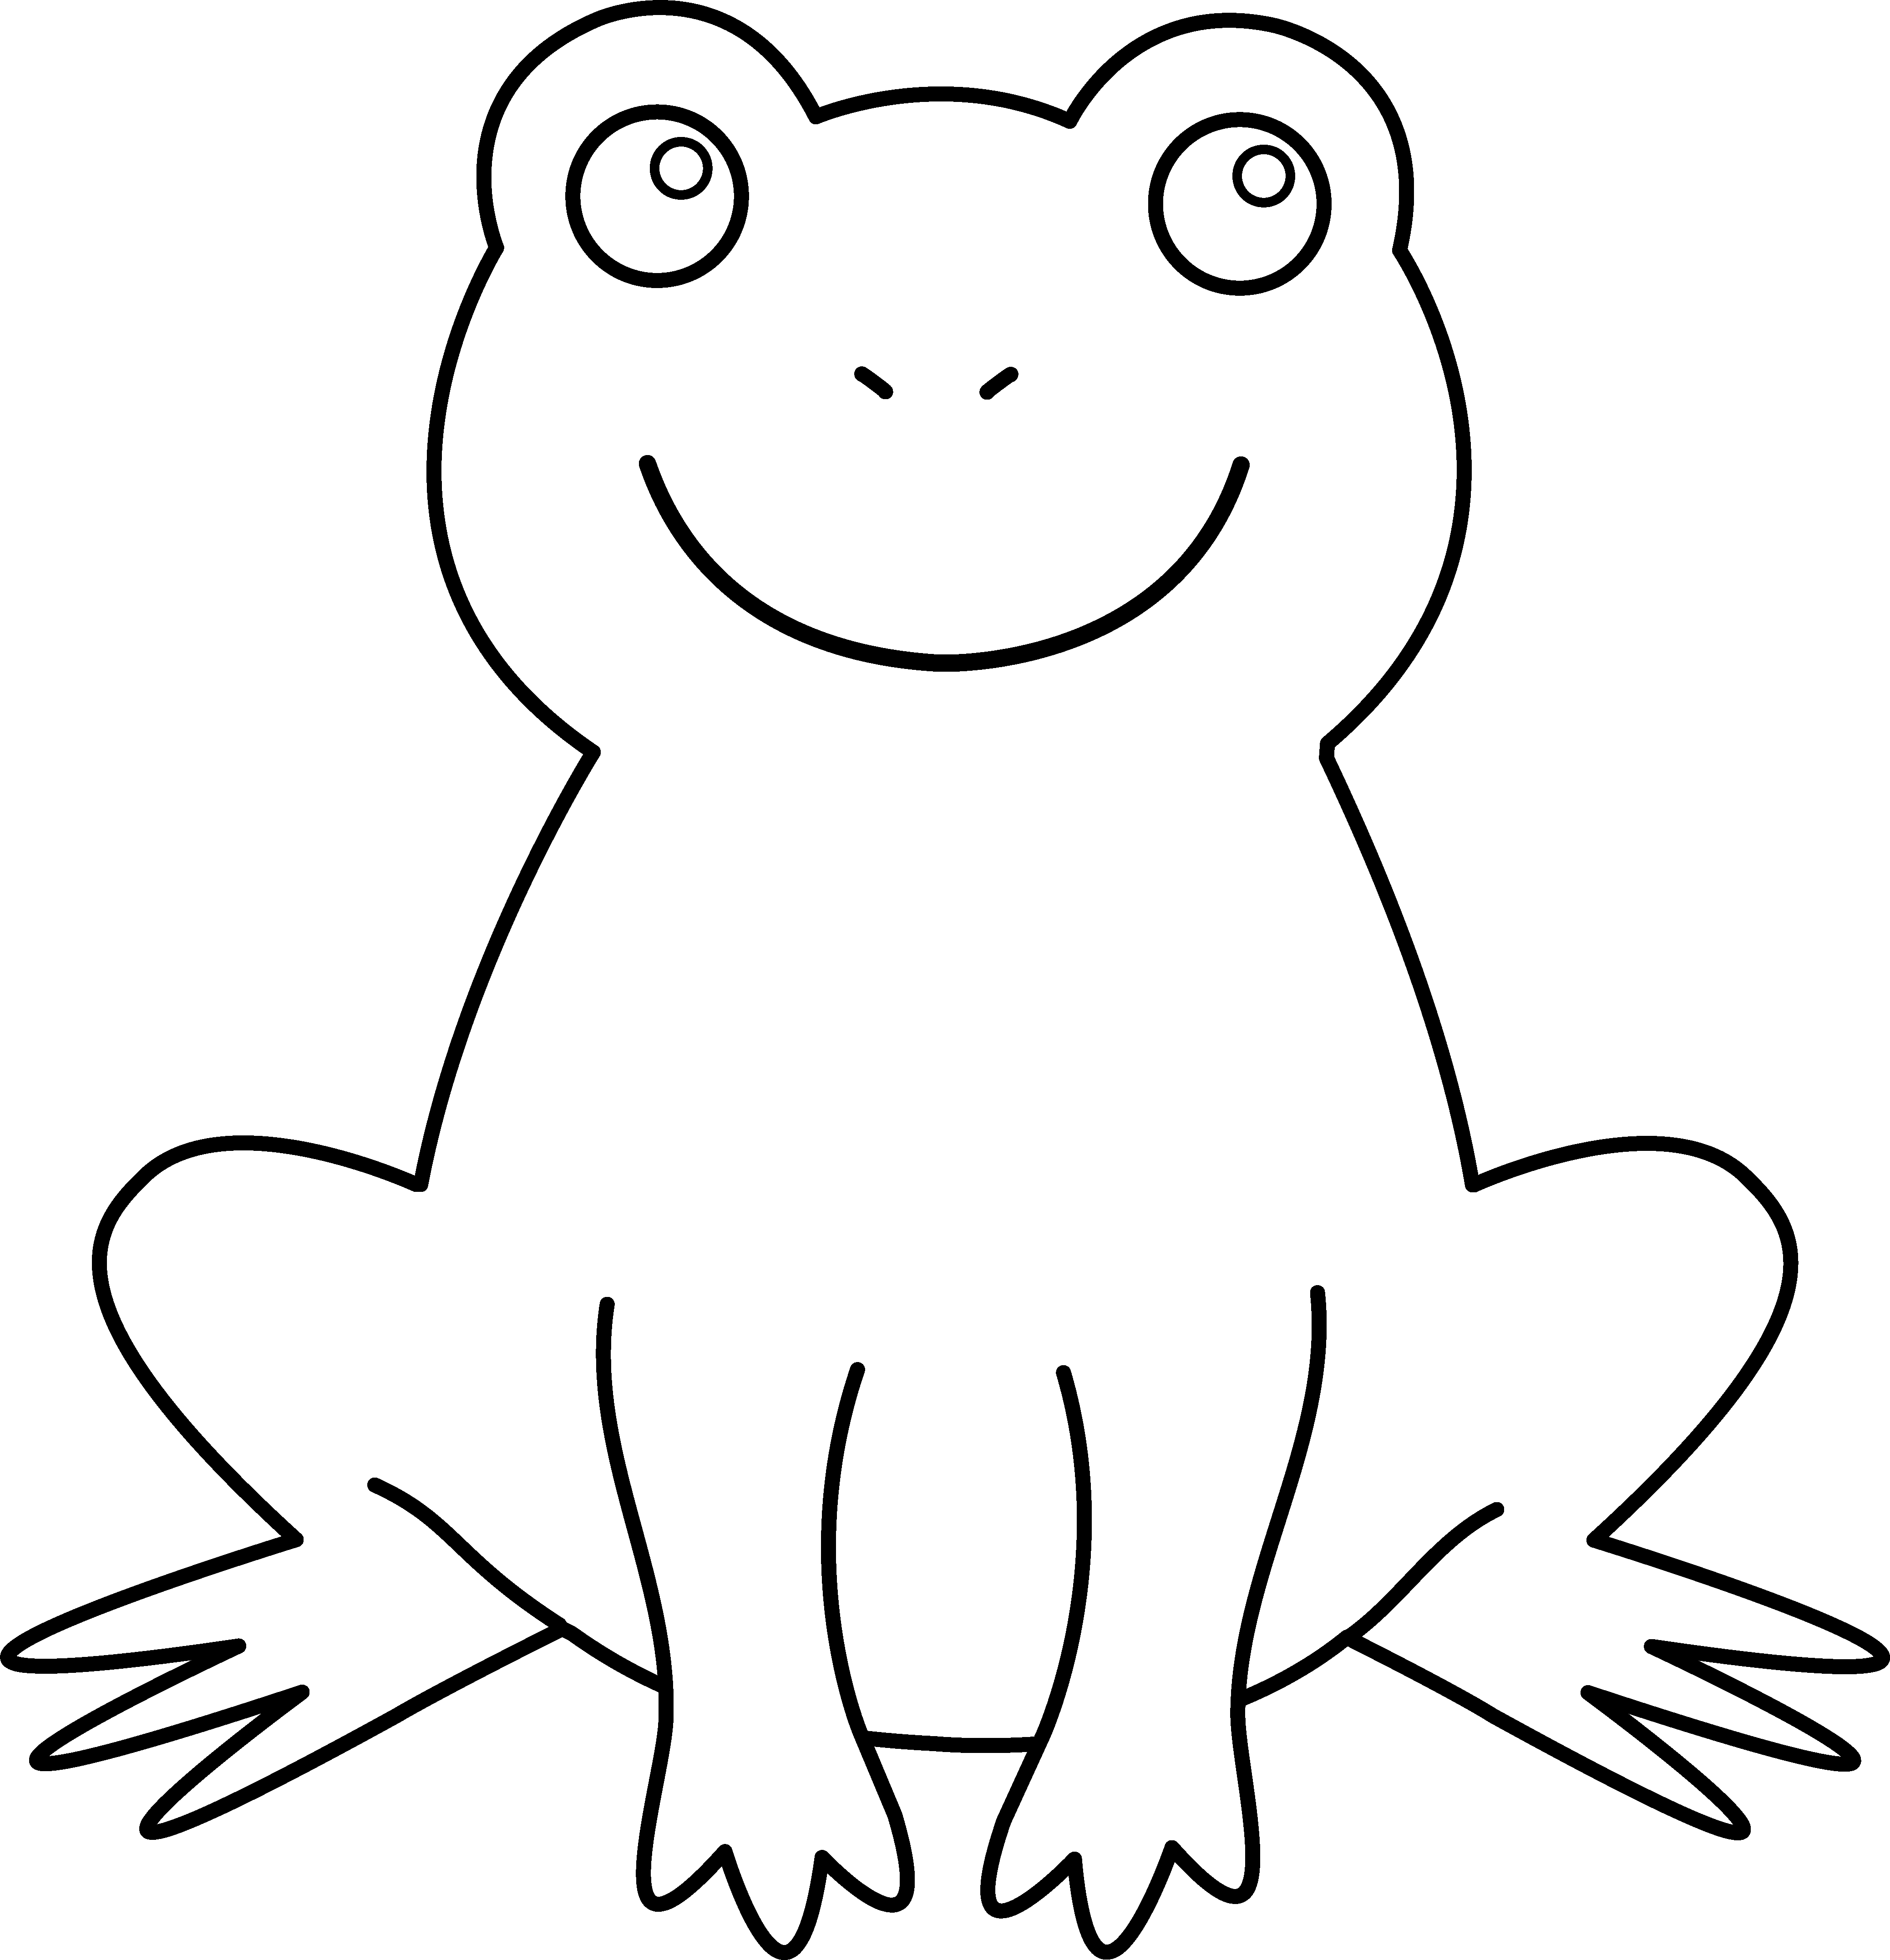 Free Black And White Frog Pictures, Download Free Clip Art